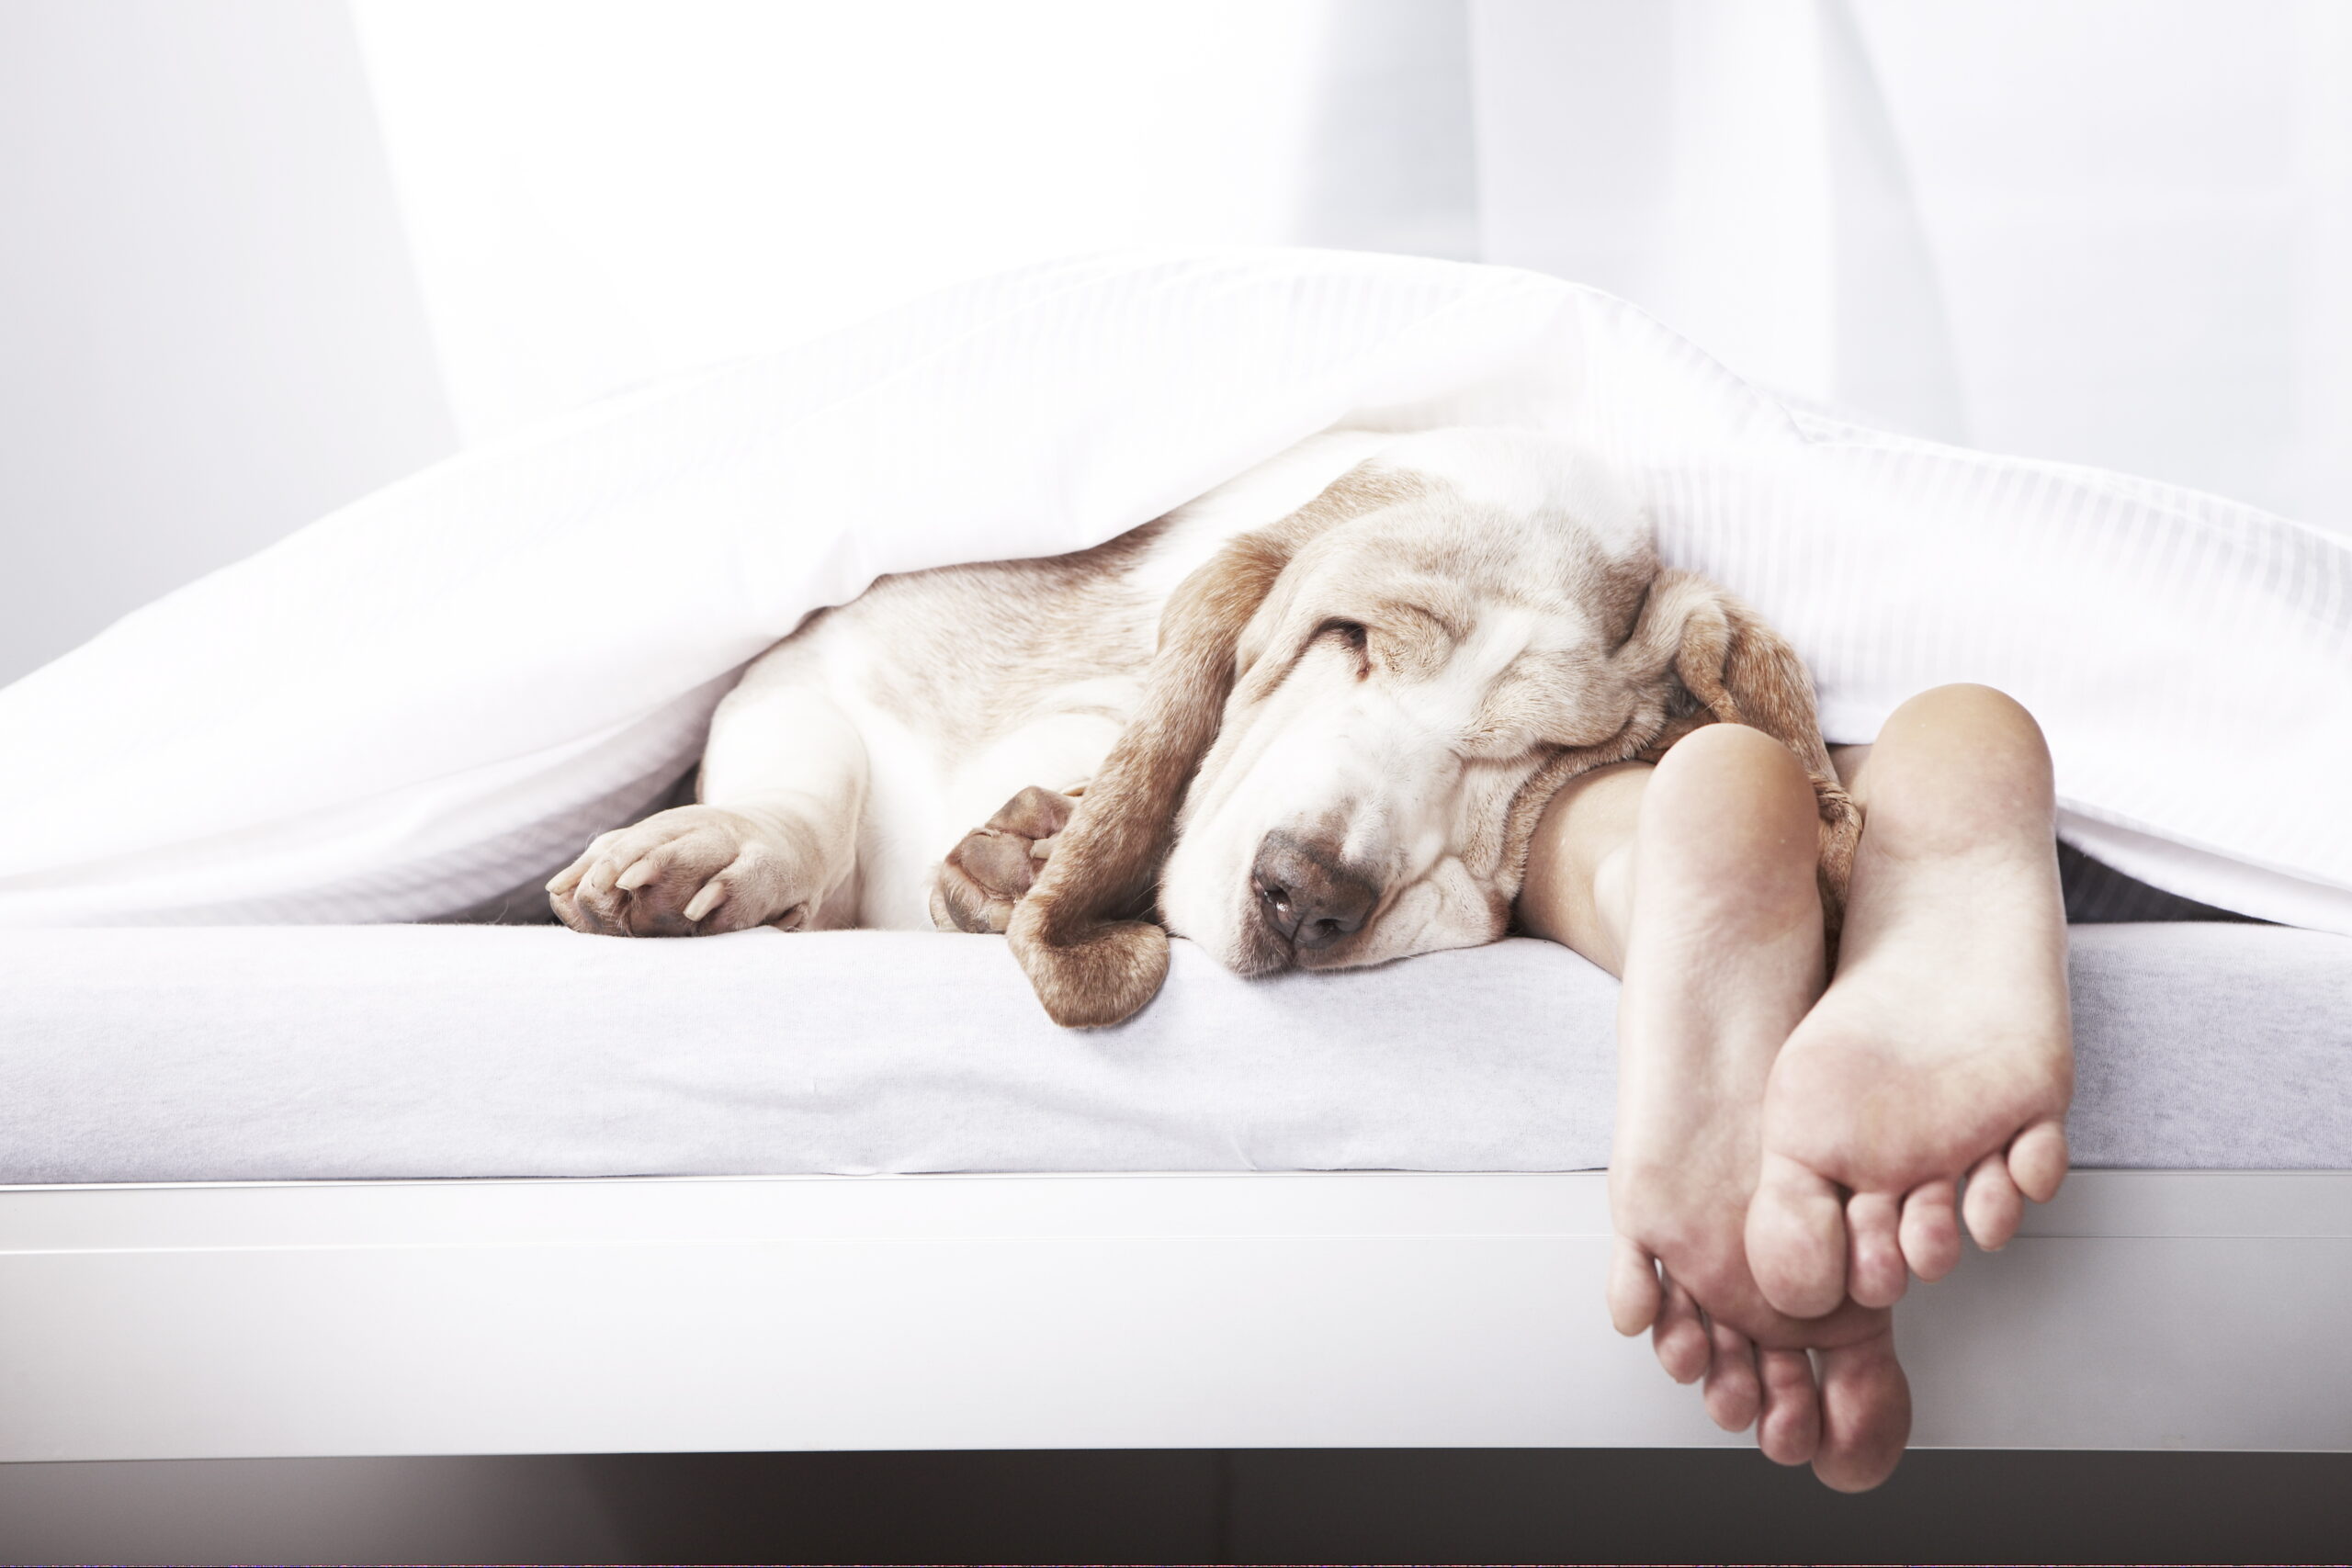 No, sharing the bed with your dog won’t really ‘ruin’ your sleep